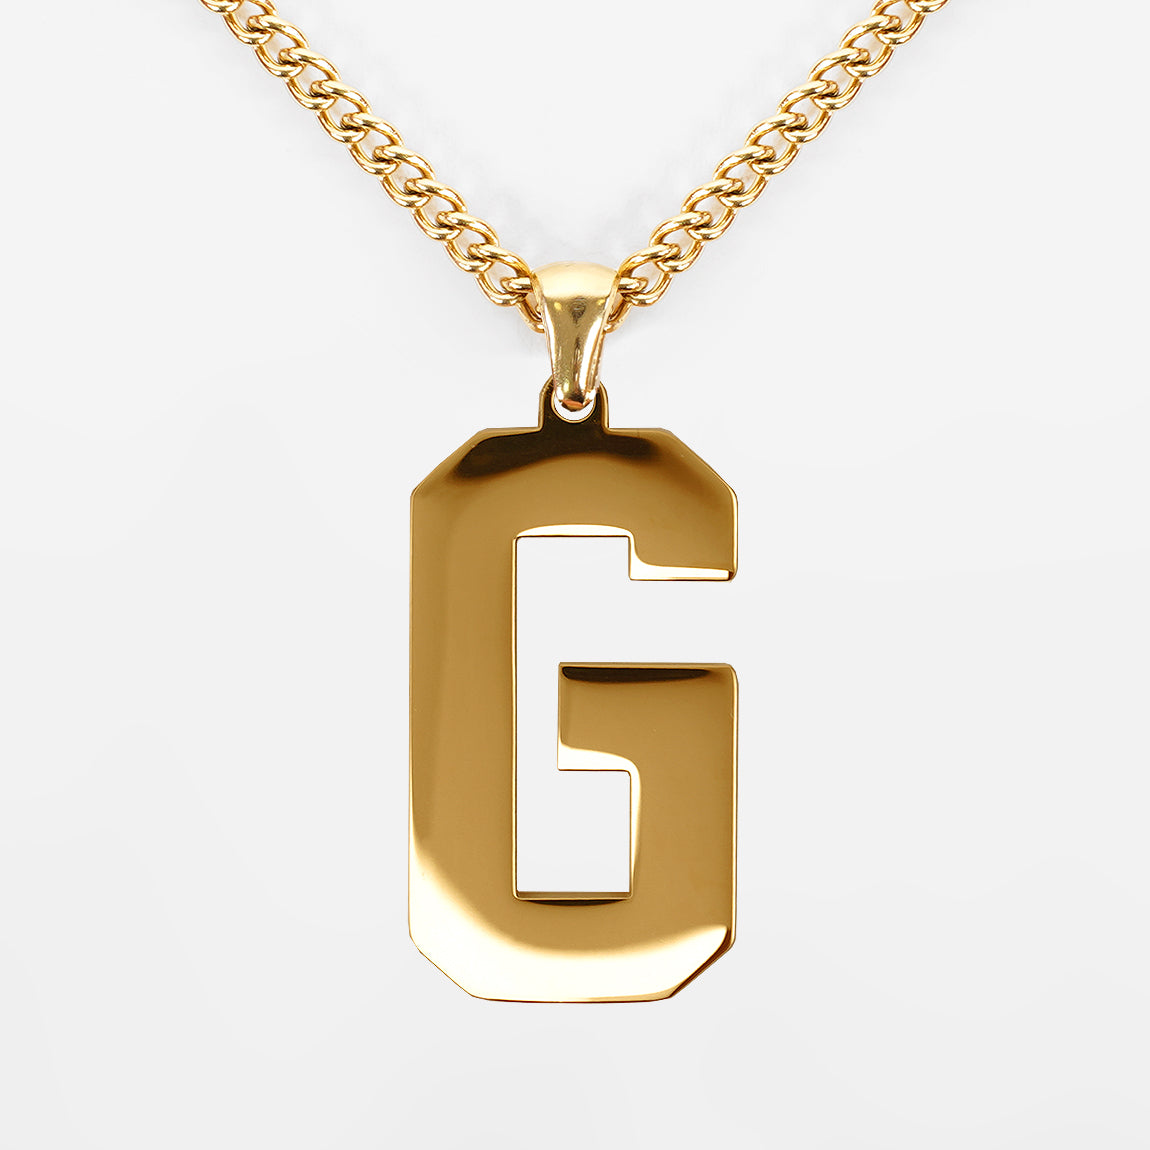 G Letter Pendant with Chain Necklace - Gold Plated Stainless Steel